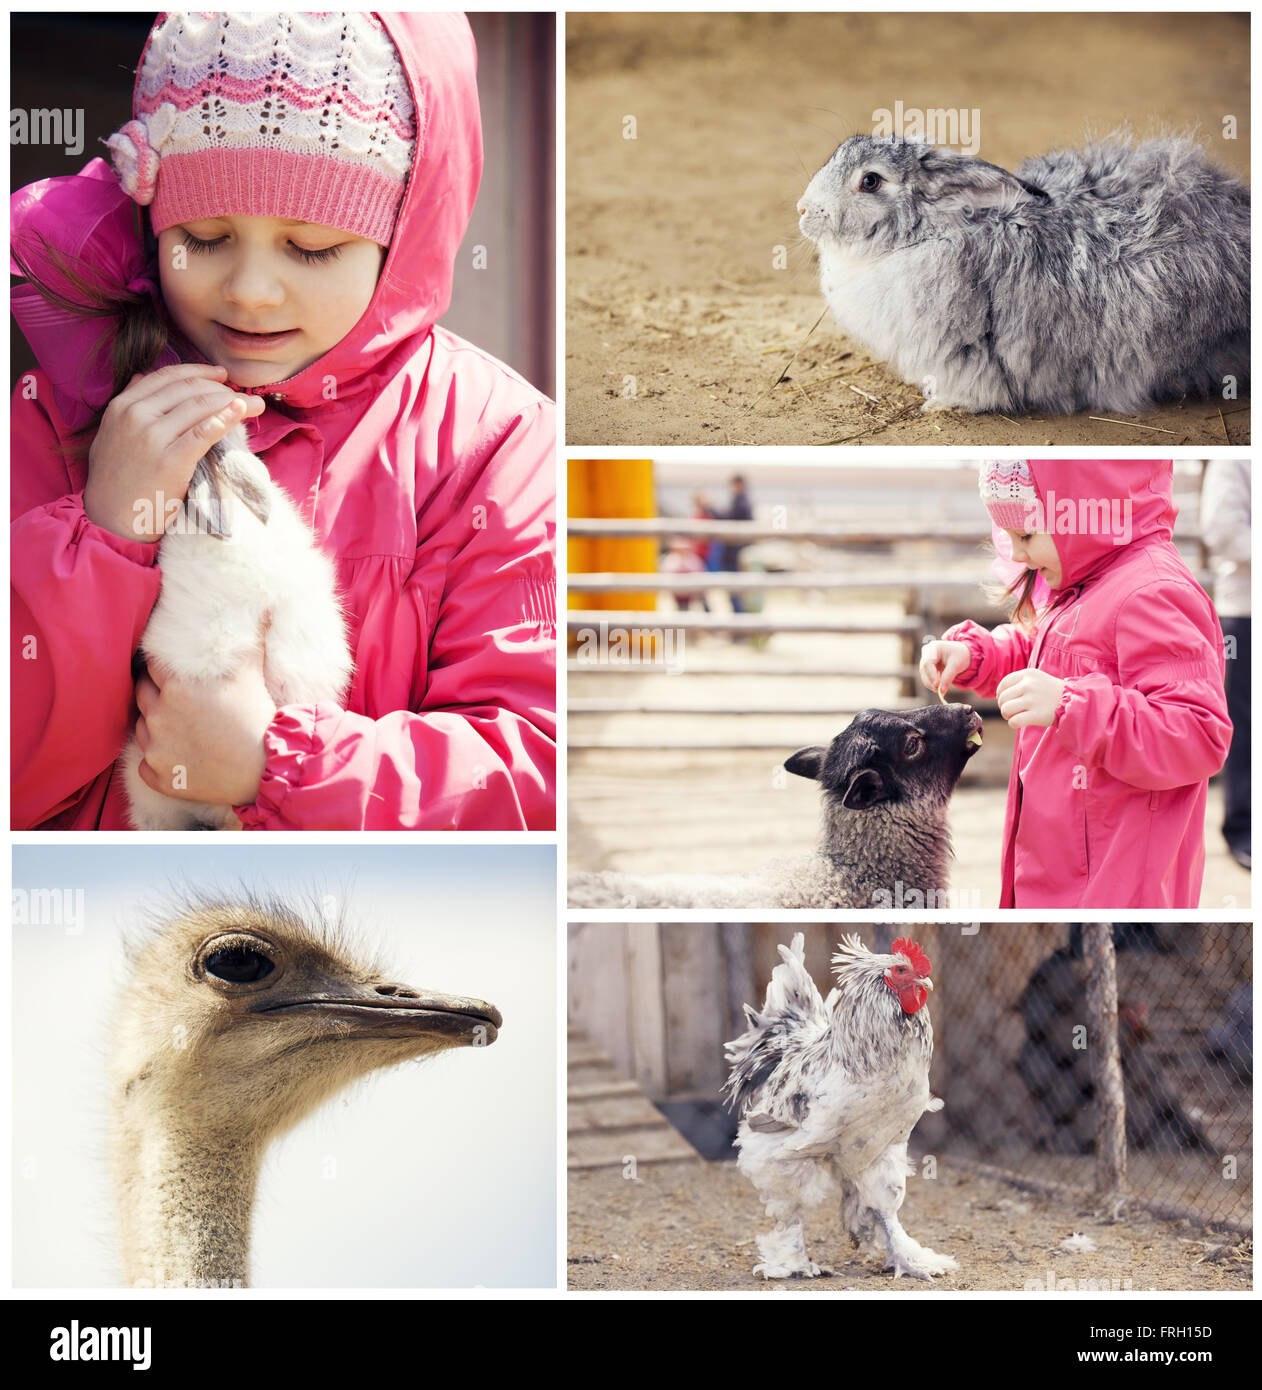 Little girl on a farm with animals Stock Photo